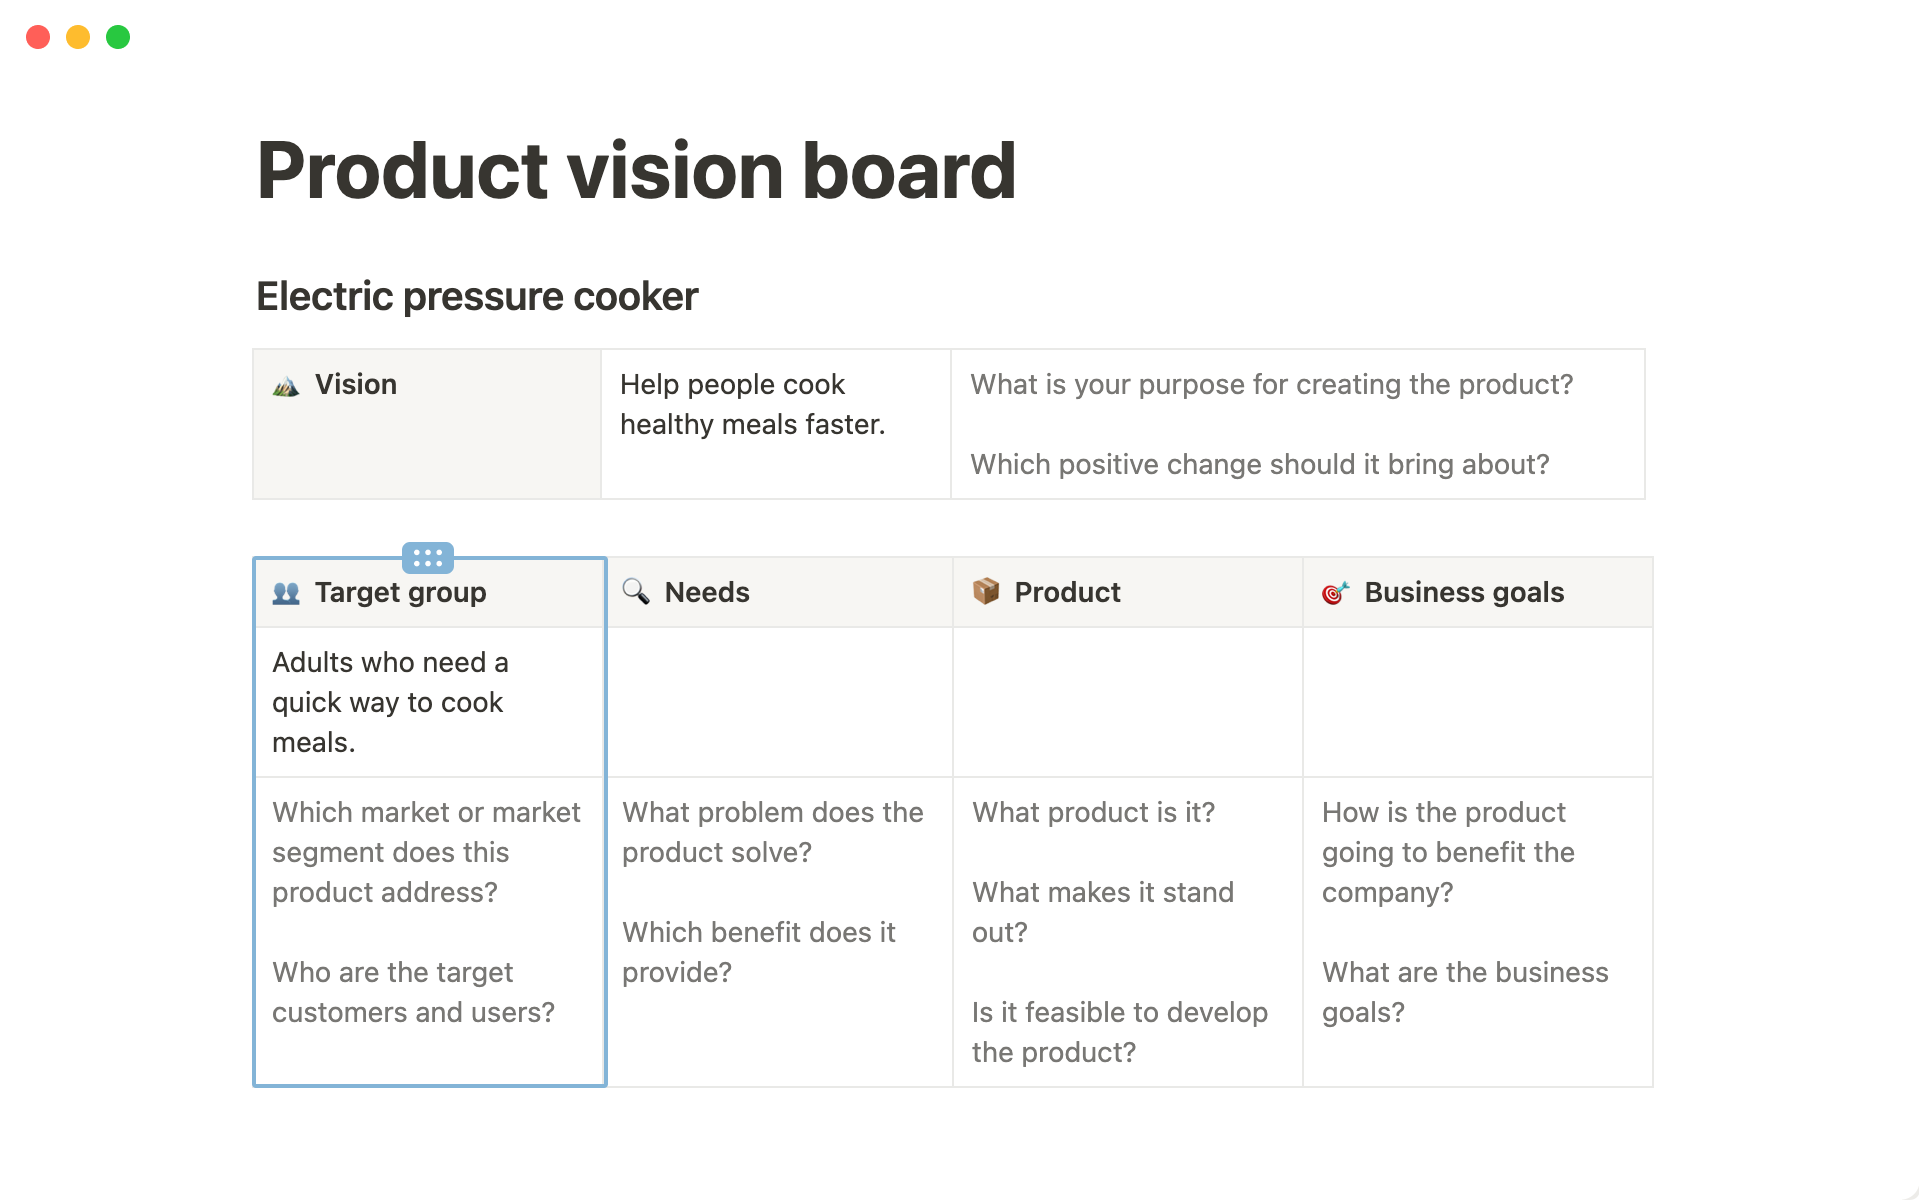 Add the end users of your product.